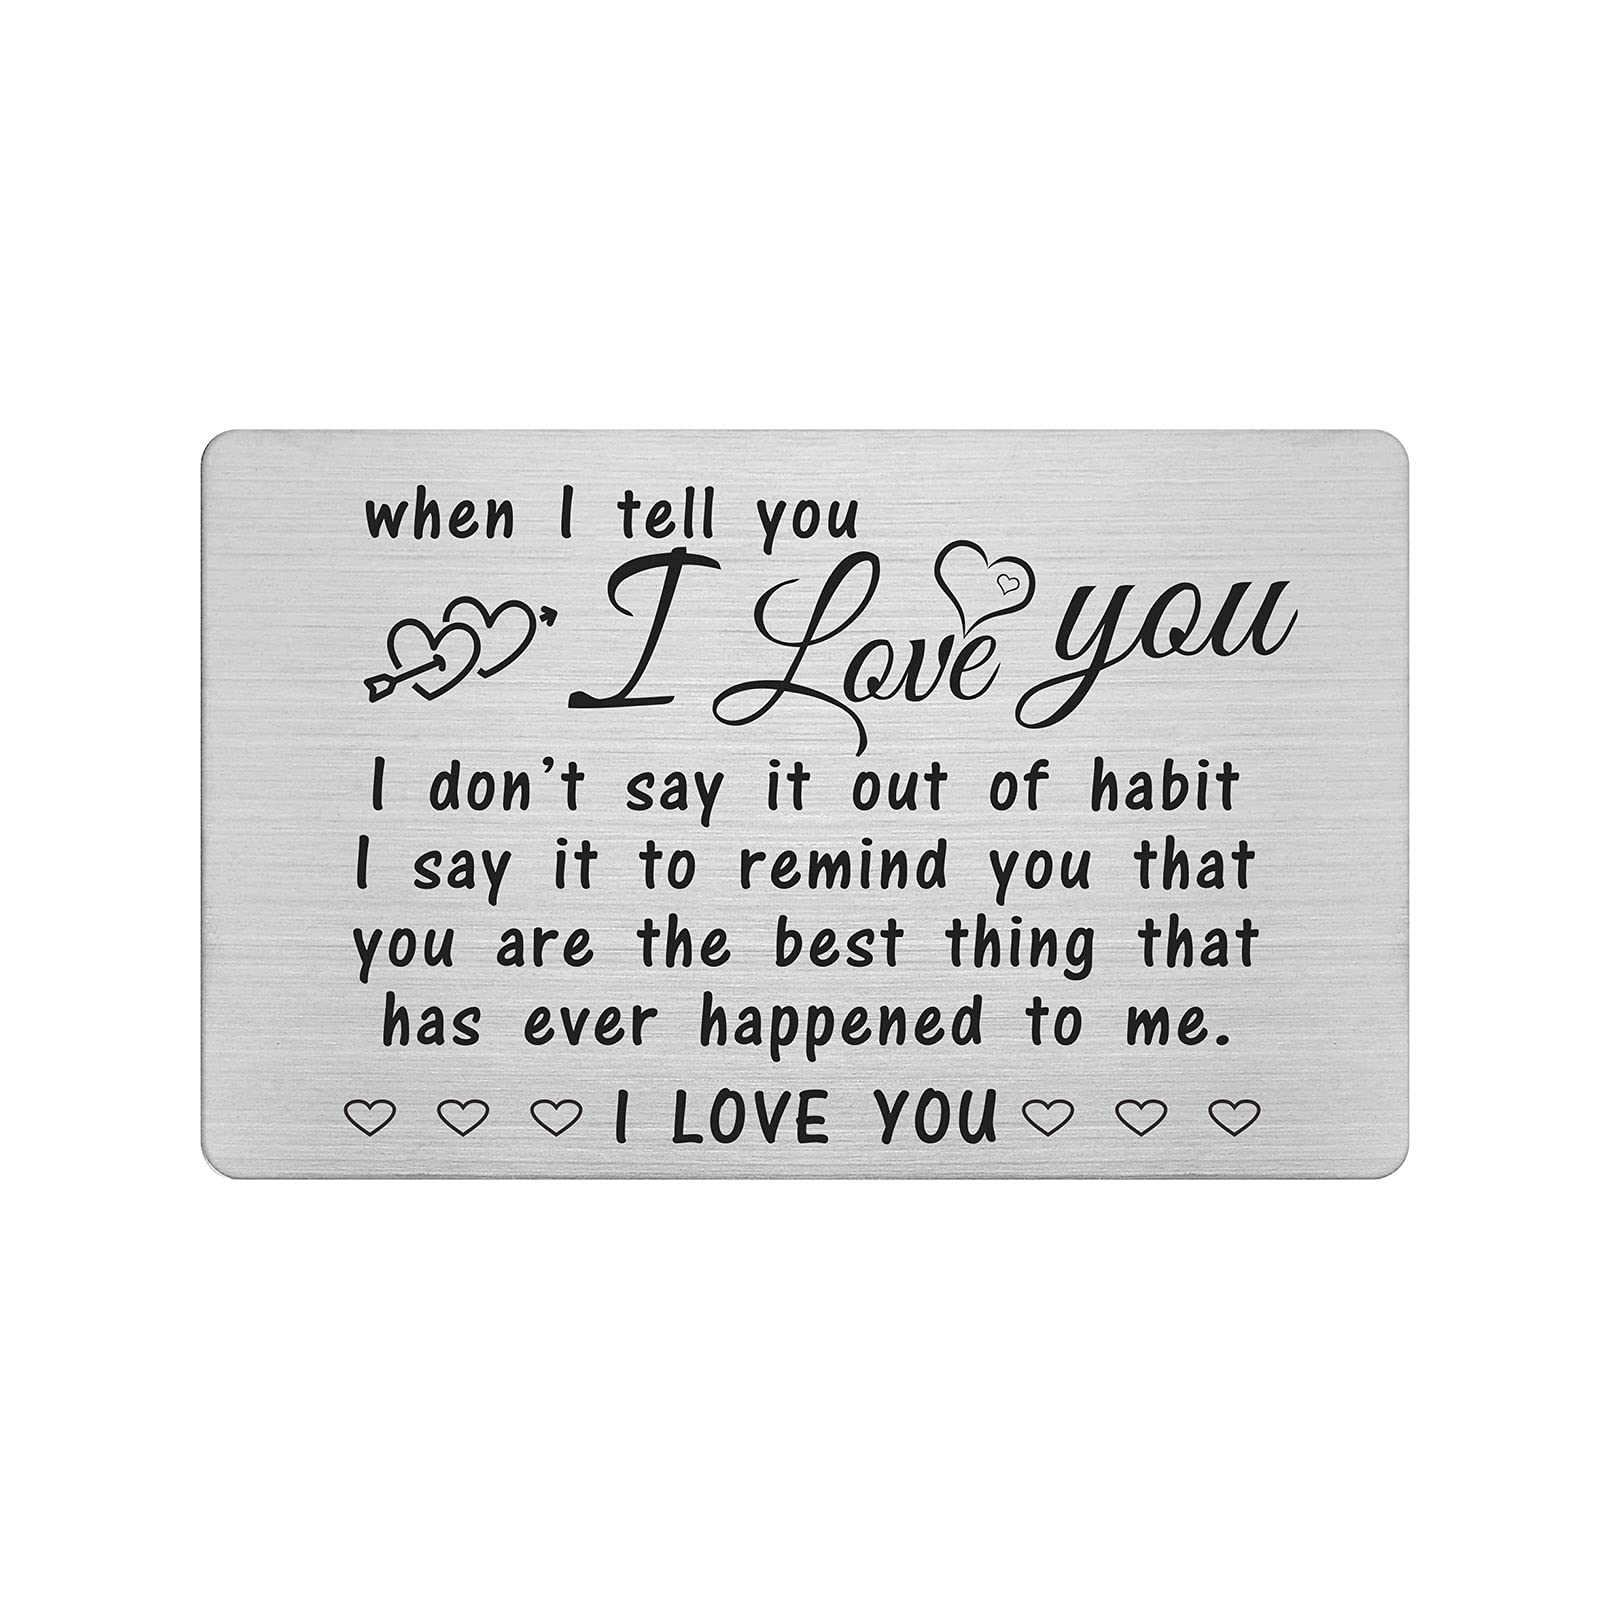 Yobent When I Tell You I Love You Gifts For Him Men, Mini Love Note Card, Happy Graduation Birthday Present, Long Distance Relationship